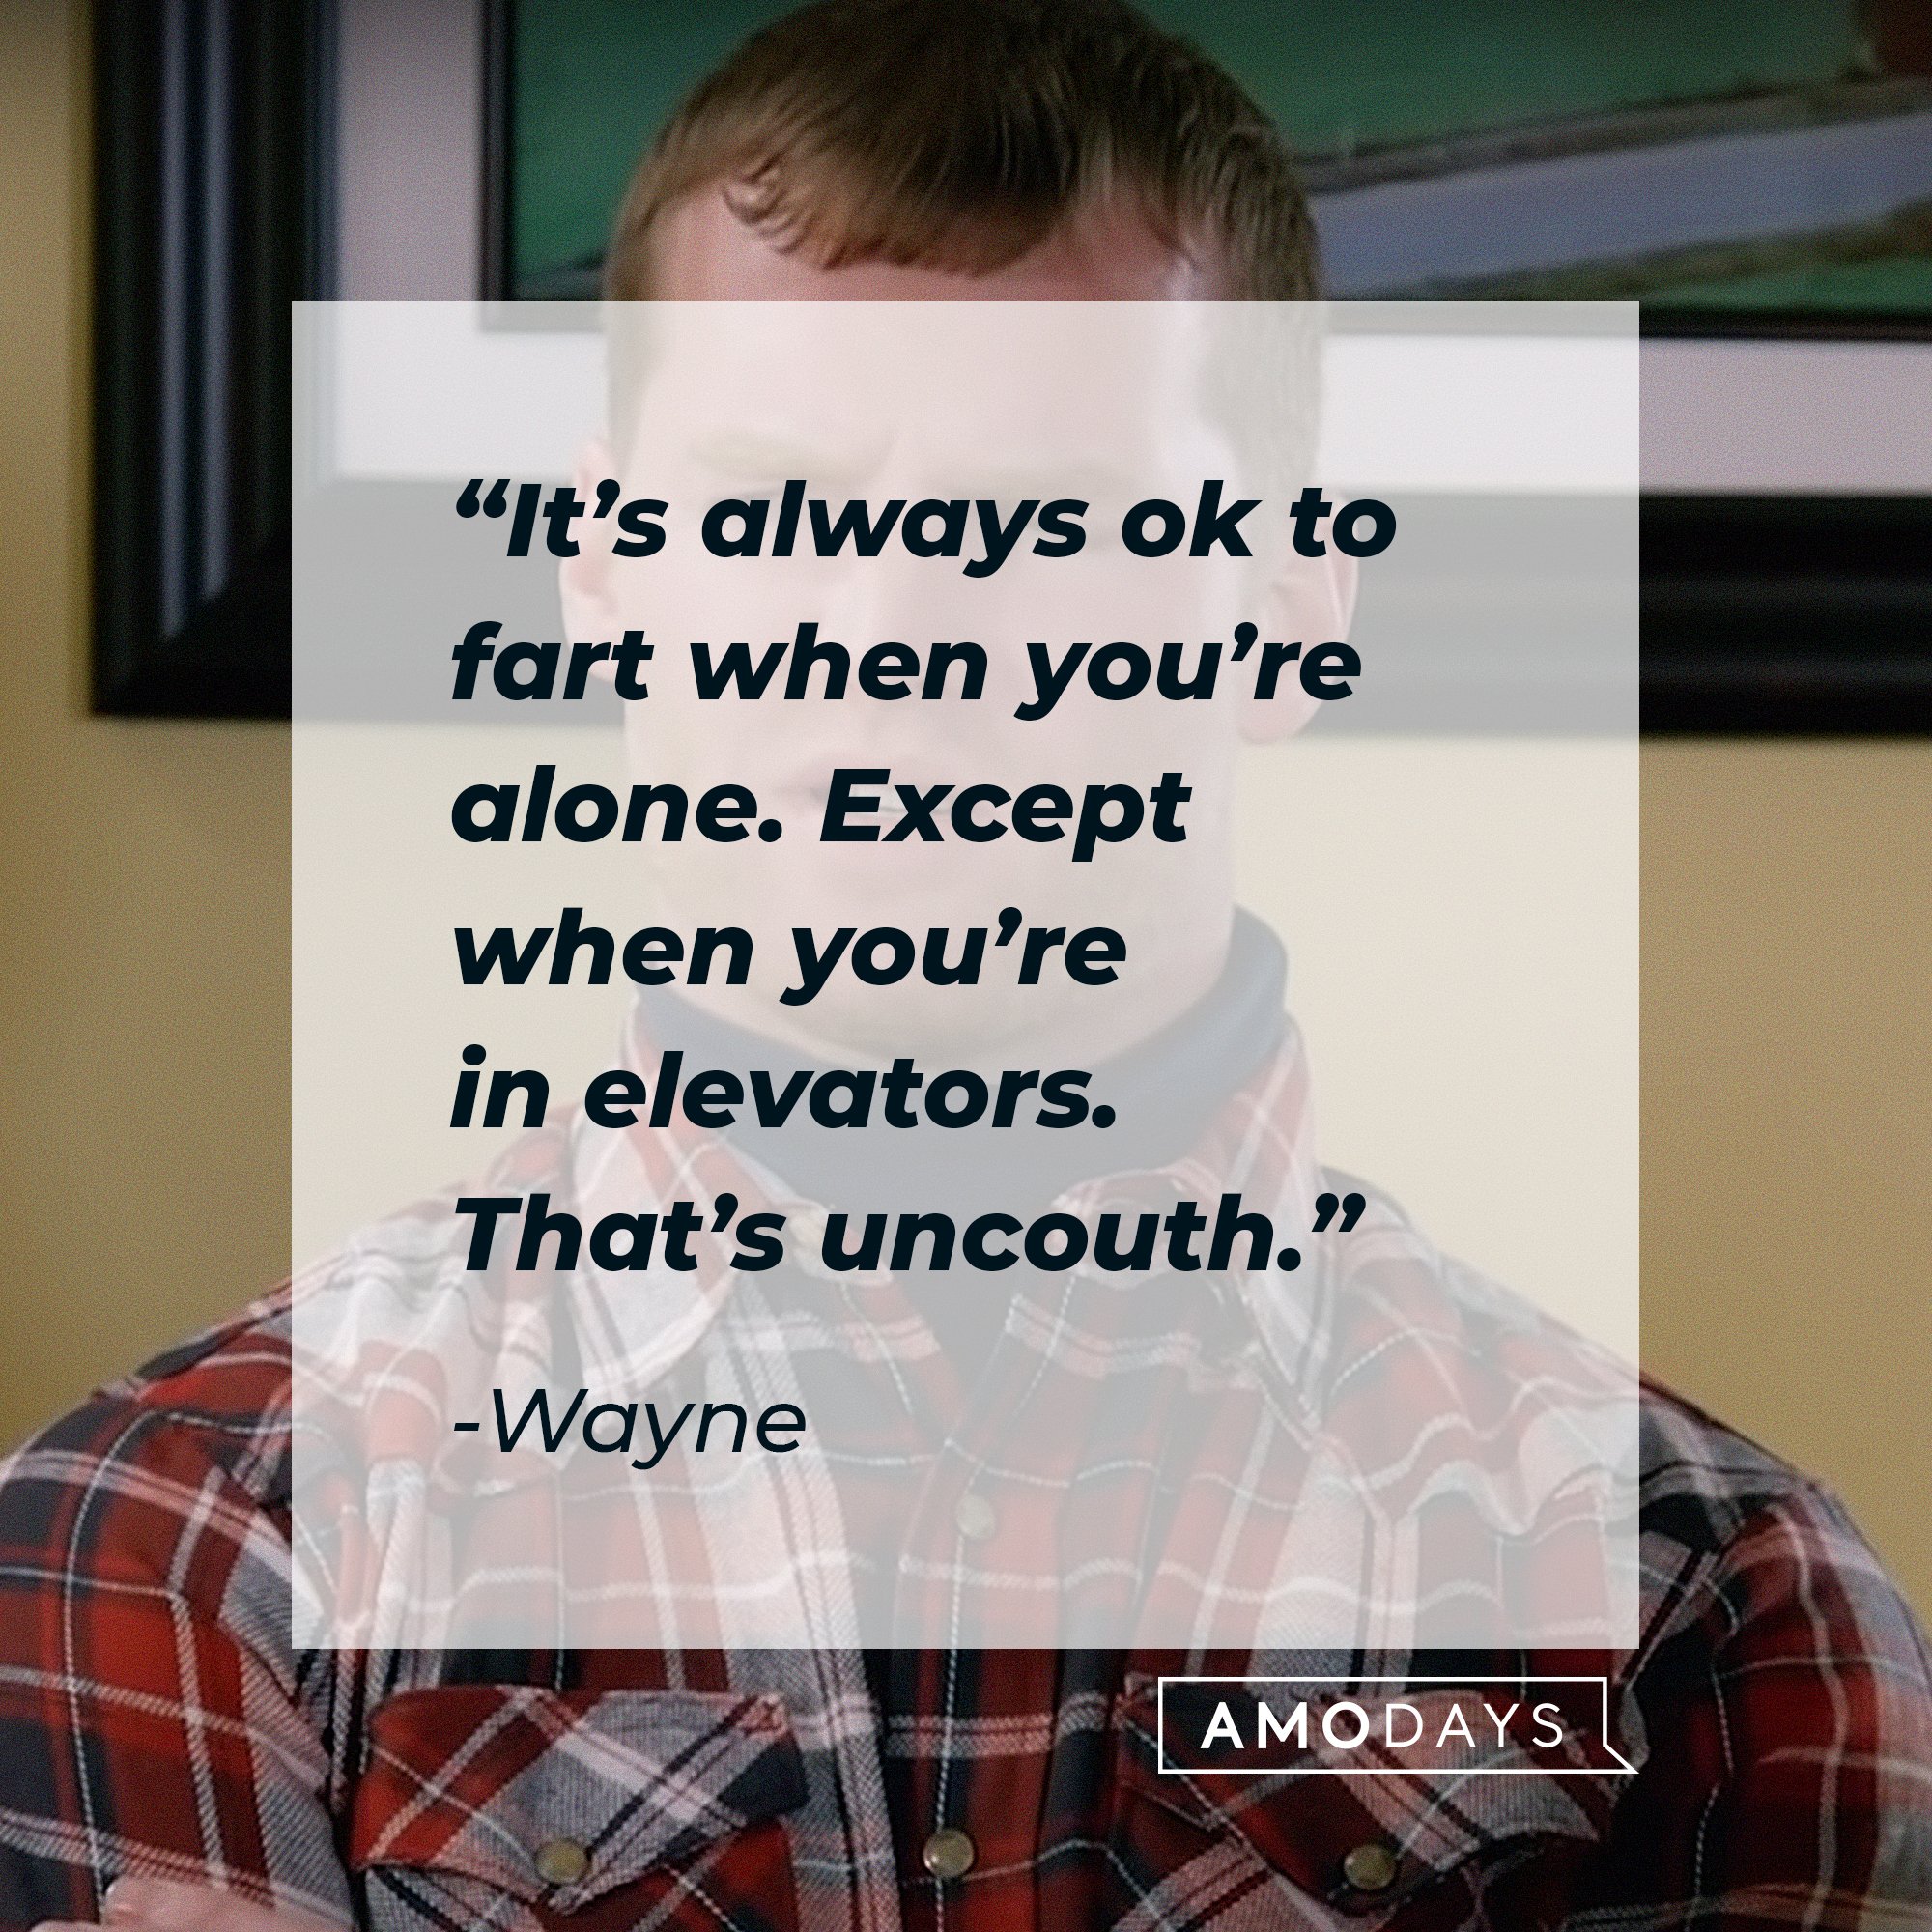 Wayne’s quote: “It’s always ok to fart when you’re alone. Except when you’re in elevators. That’s uncouth.” | Image: AmoDays